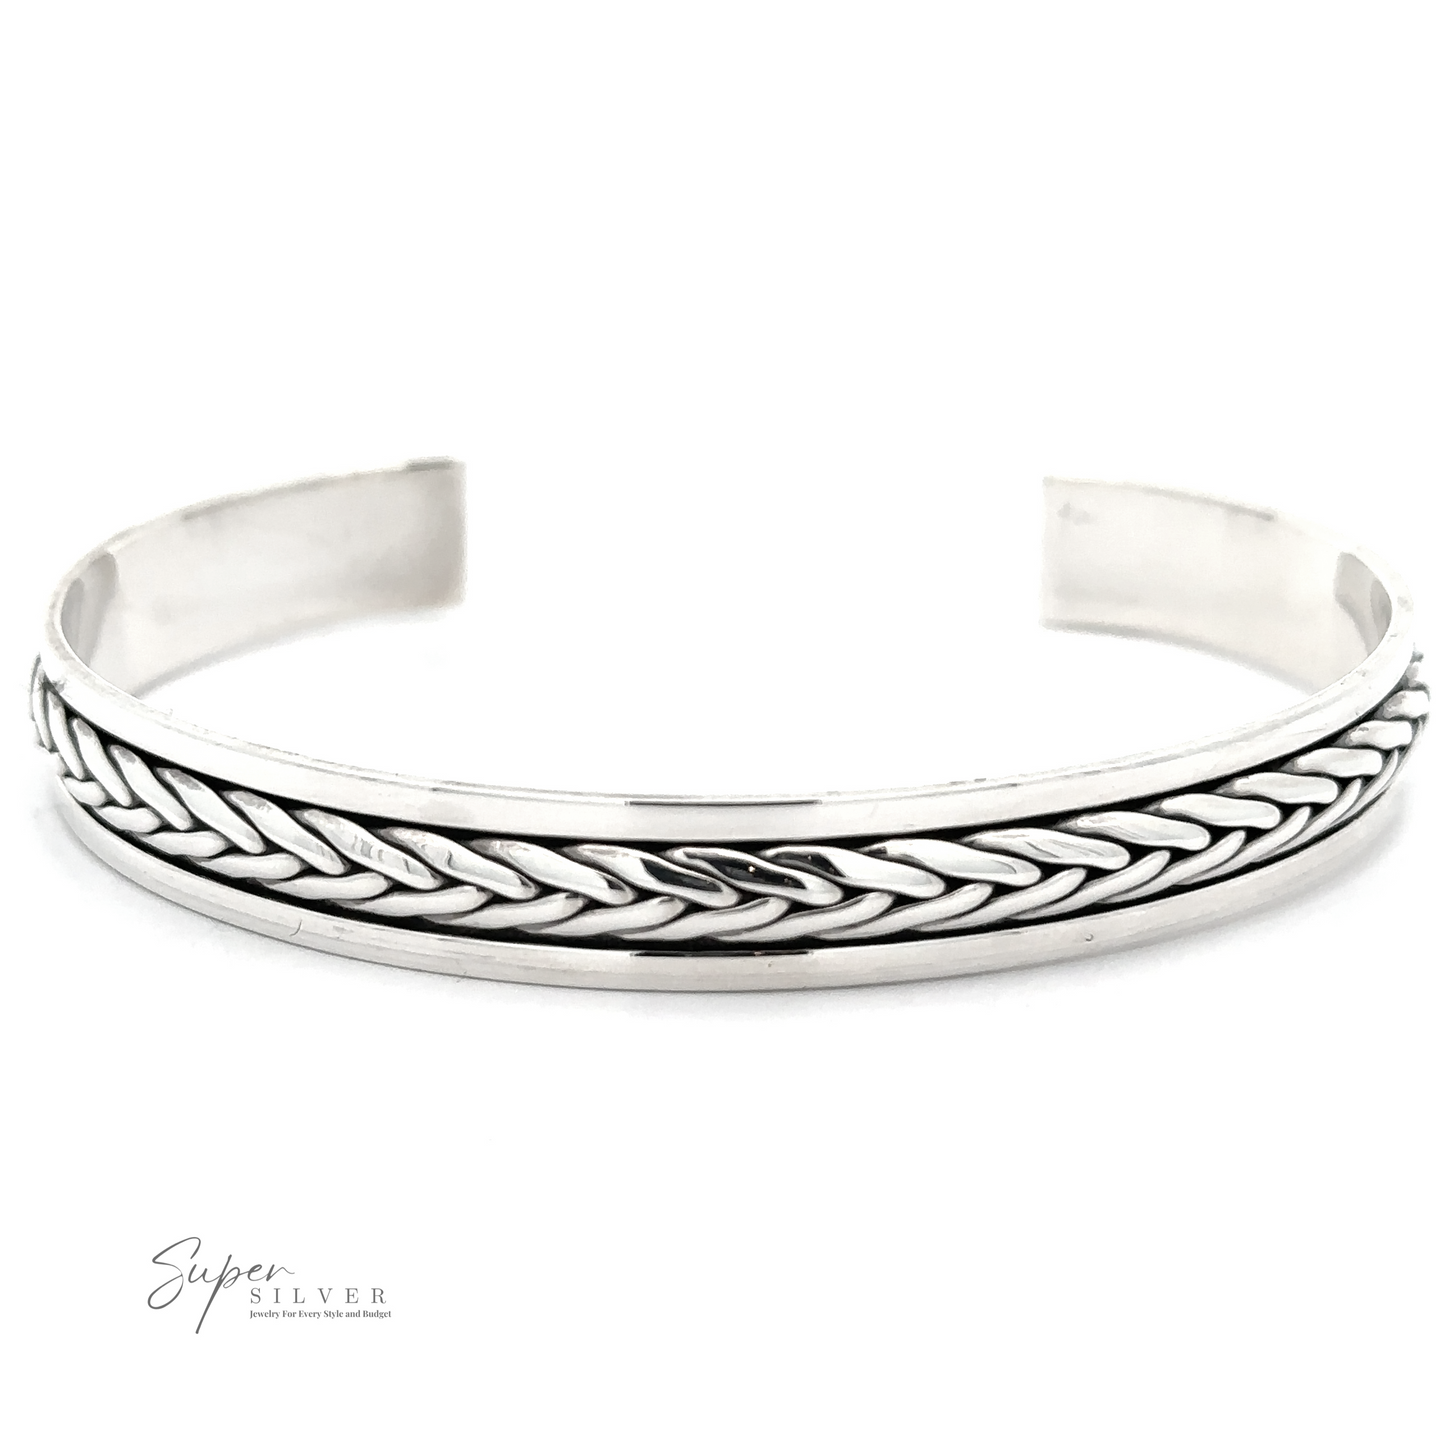 A sterling silver bracelet, the Braided Cuff Bracelet boasts a polished finish and intricate woven detailing. Perfect as a stacking bracelet or worn alone for a touch of elegance.